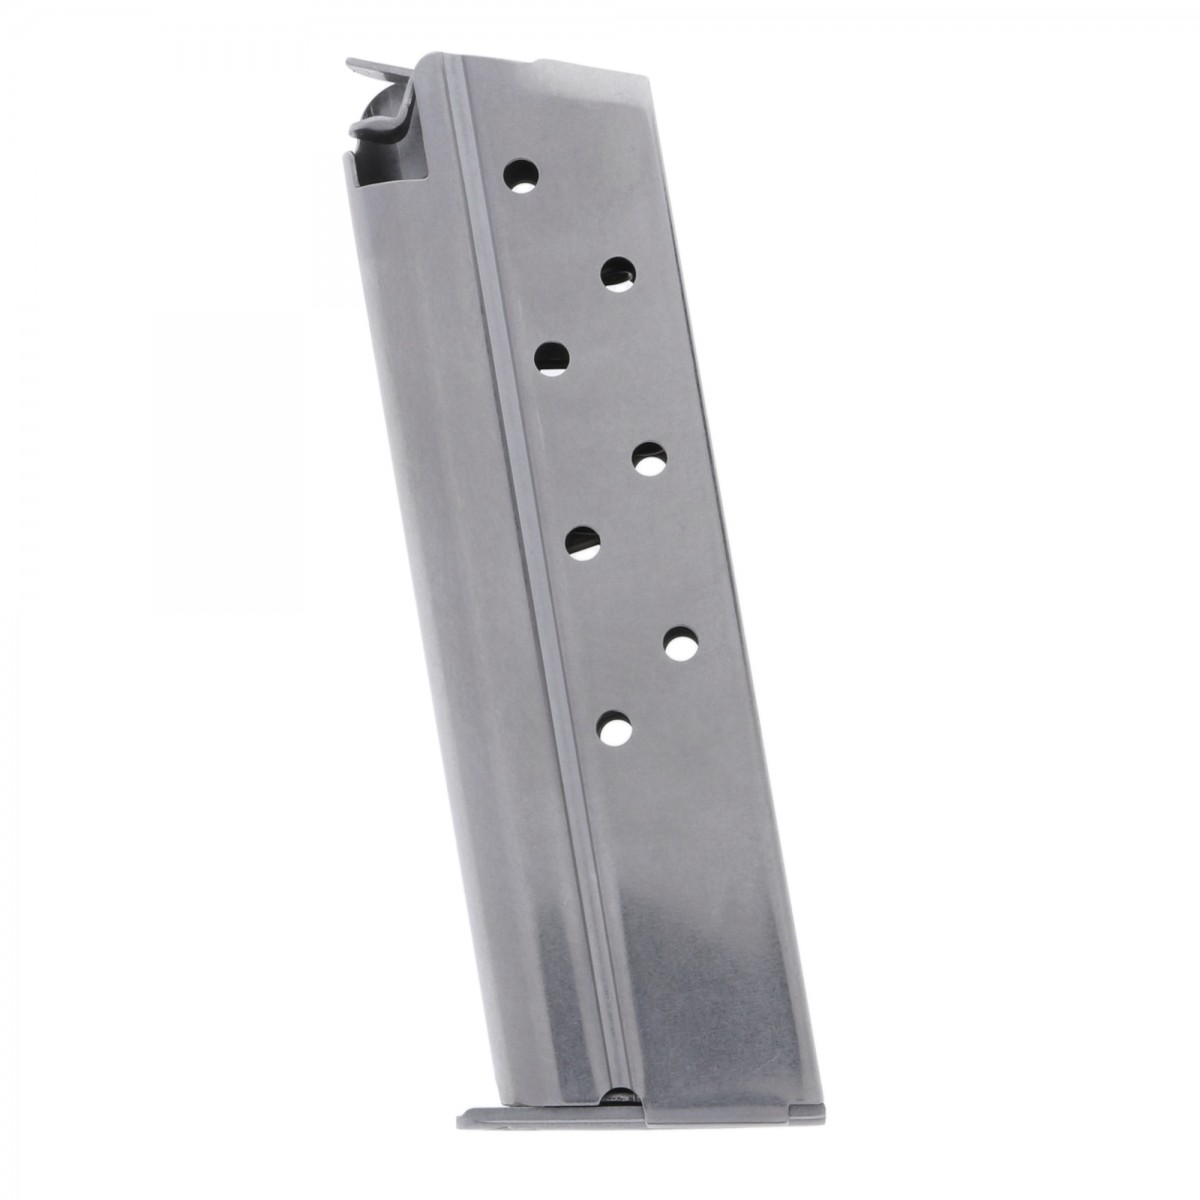 Springfield 1911 Magazine 40 S&w 9 Rounds Stainless Steel for sale online 